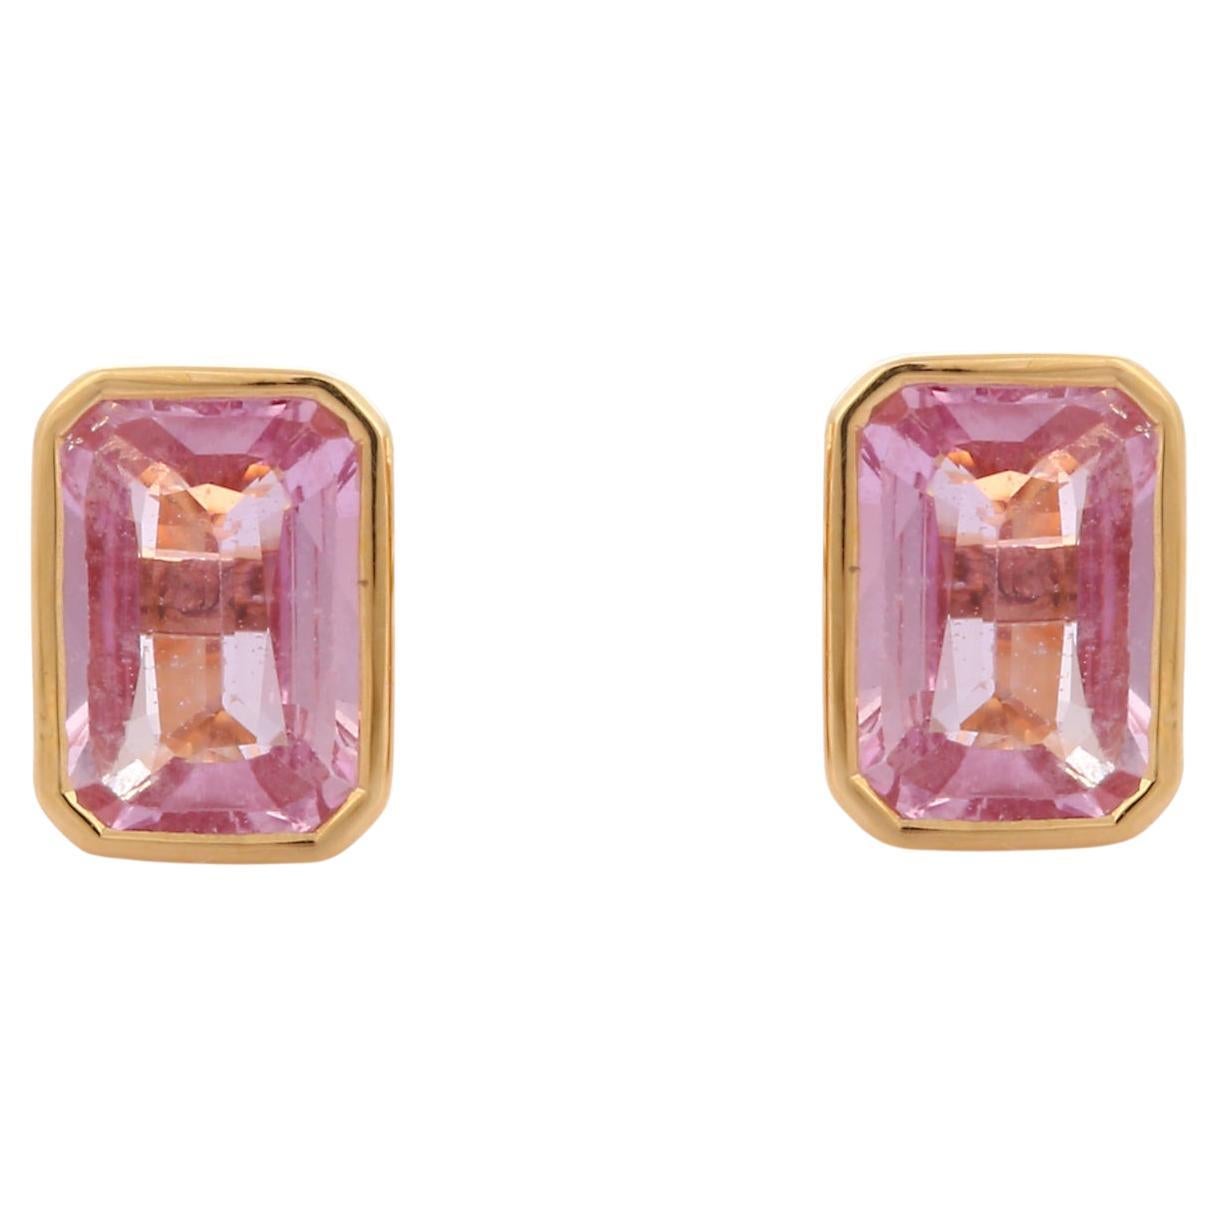 Faceted Genuine Pink Sapphire Octagon Shaped Stud Earrings in 18K Yellow Gold